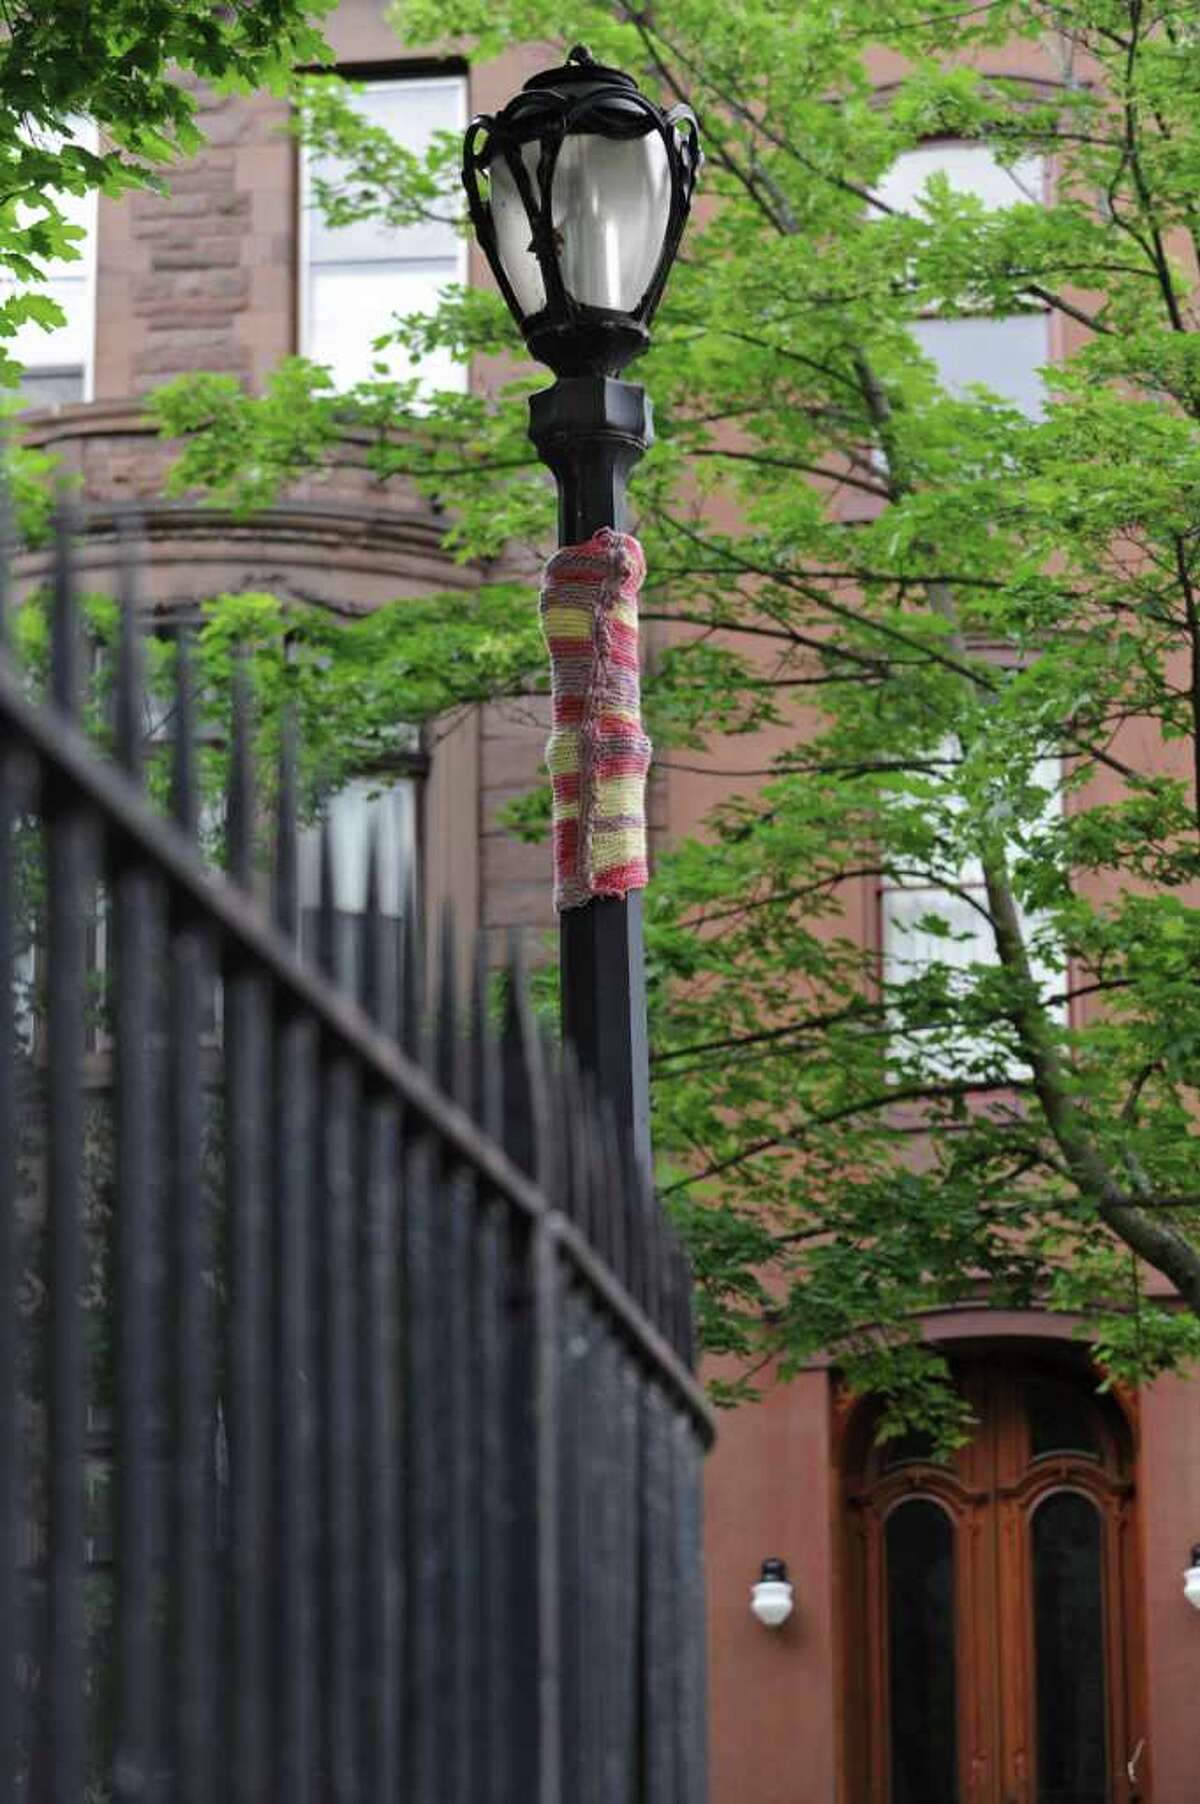 At the corner of 3rd Street and Washington Place, a "Yarn Bomber" has created a multi colored, knitted "cozy" covering part of the antique style light post in Troy, N.Y. Tuesday June 14, 2011. (Lori Van Buren / Times Union)